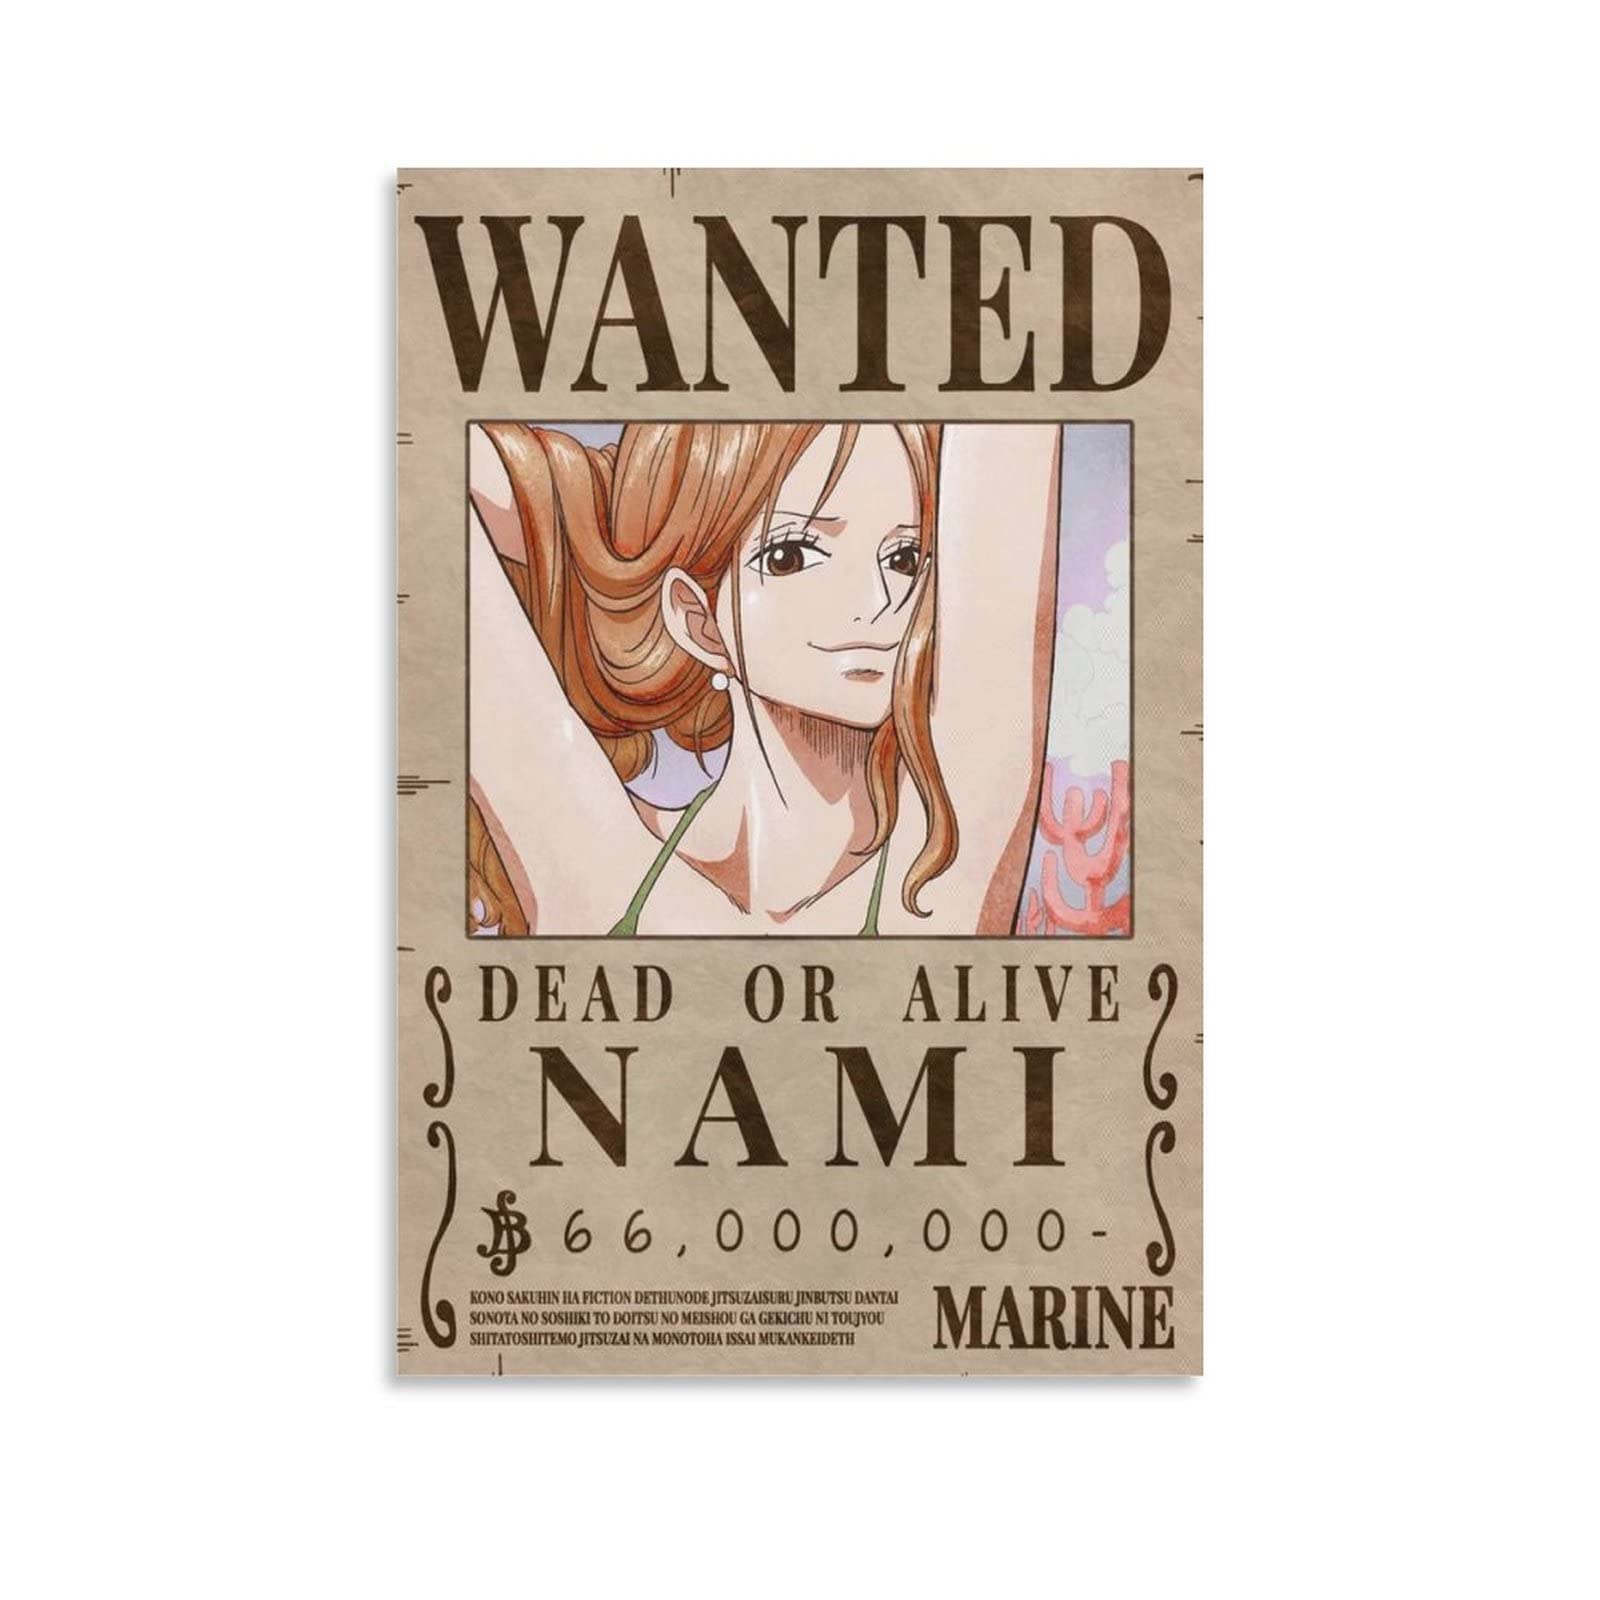 Poster One Piece Wanted Bounty Robin Bounty Wanted Poster Anime Poster Abstract Poster Room Aesthetics Poster (7) Room Decor Bathroom Decor Canvas Print Poster and Picture Print Modern Family Bedroom: Posters